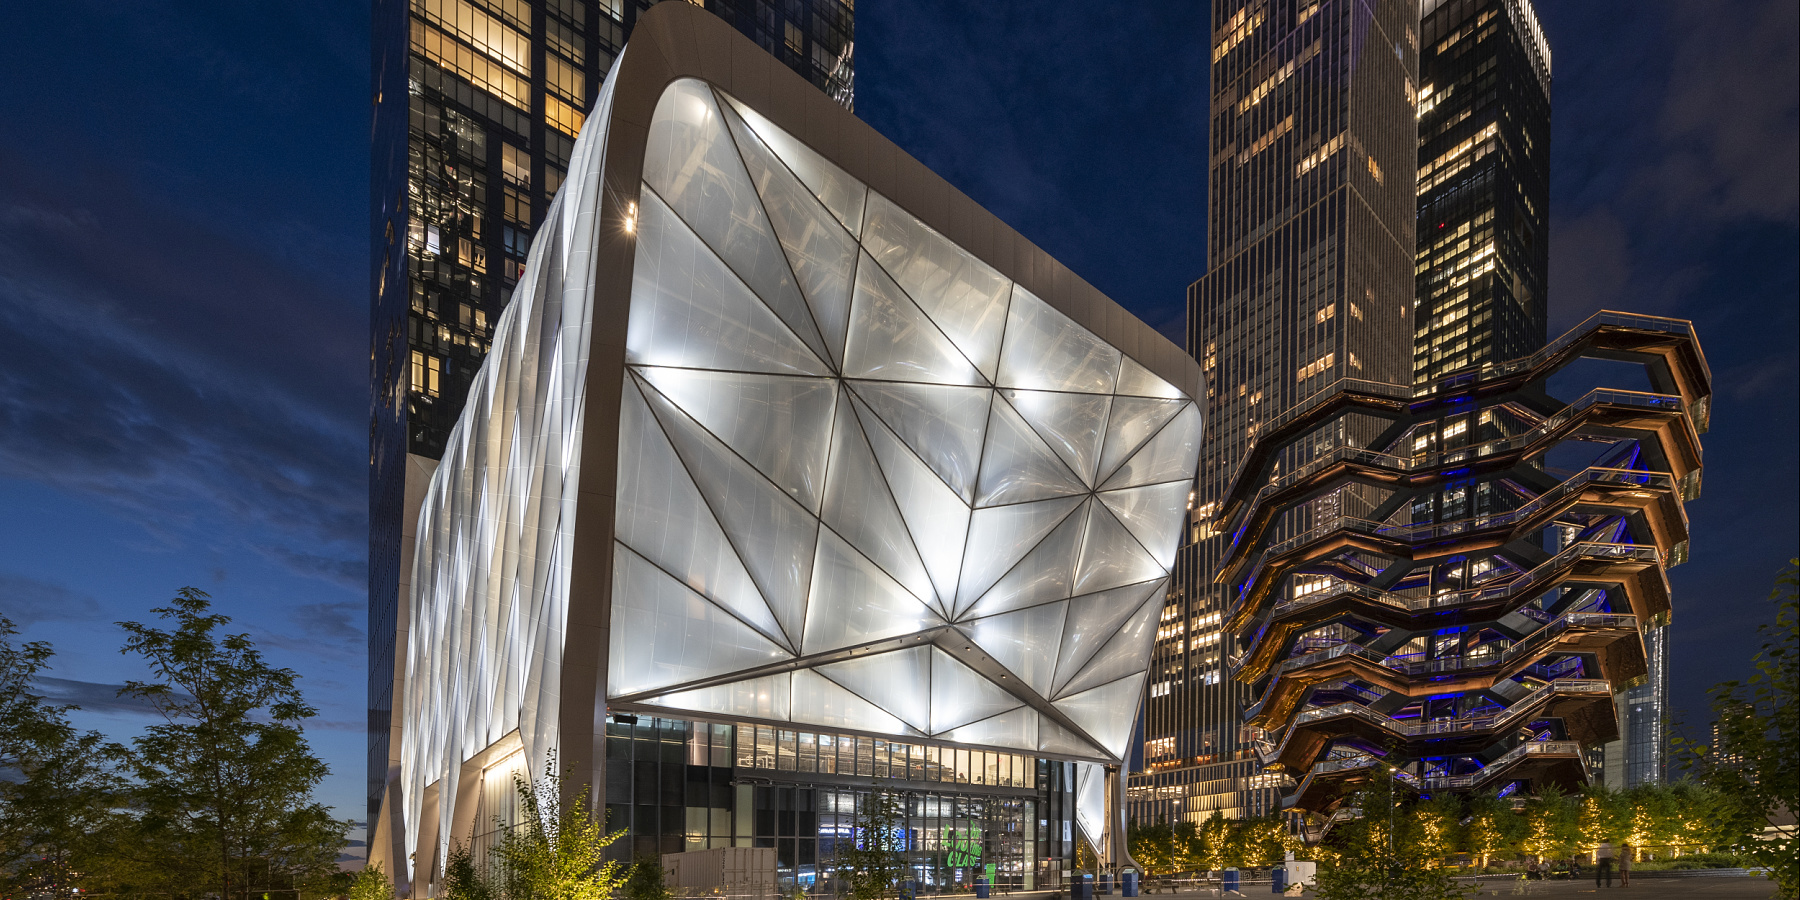 The Shed/Hudson Yards, New York City / ERCO, New York City, Hudson Yards, Etats-Unis